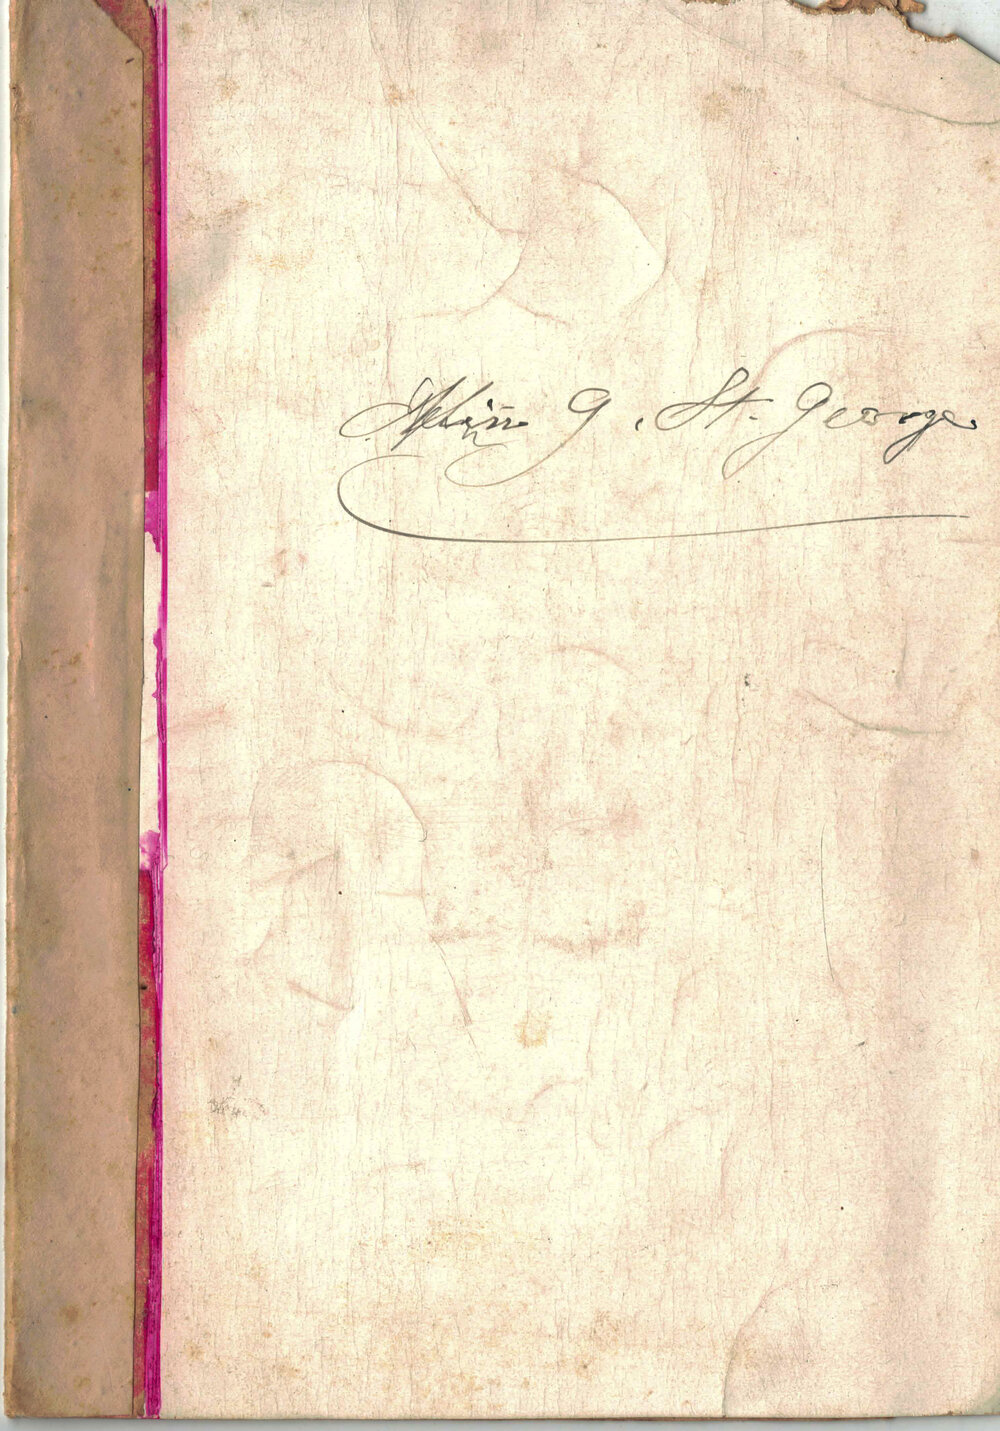   Front Cover   Miss G. St. George 